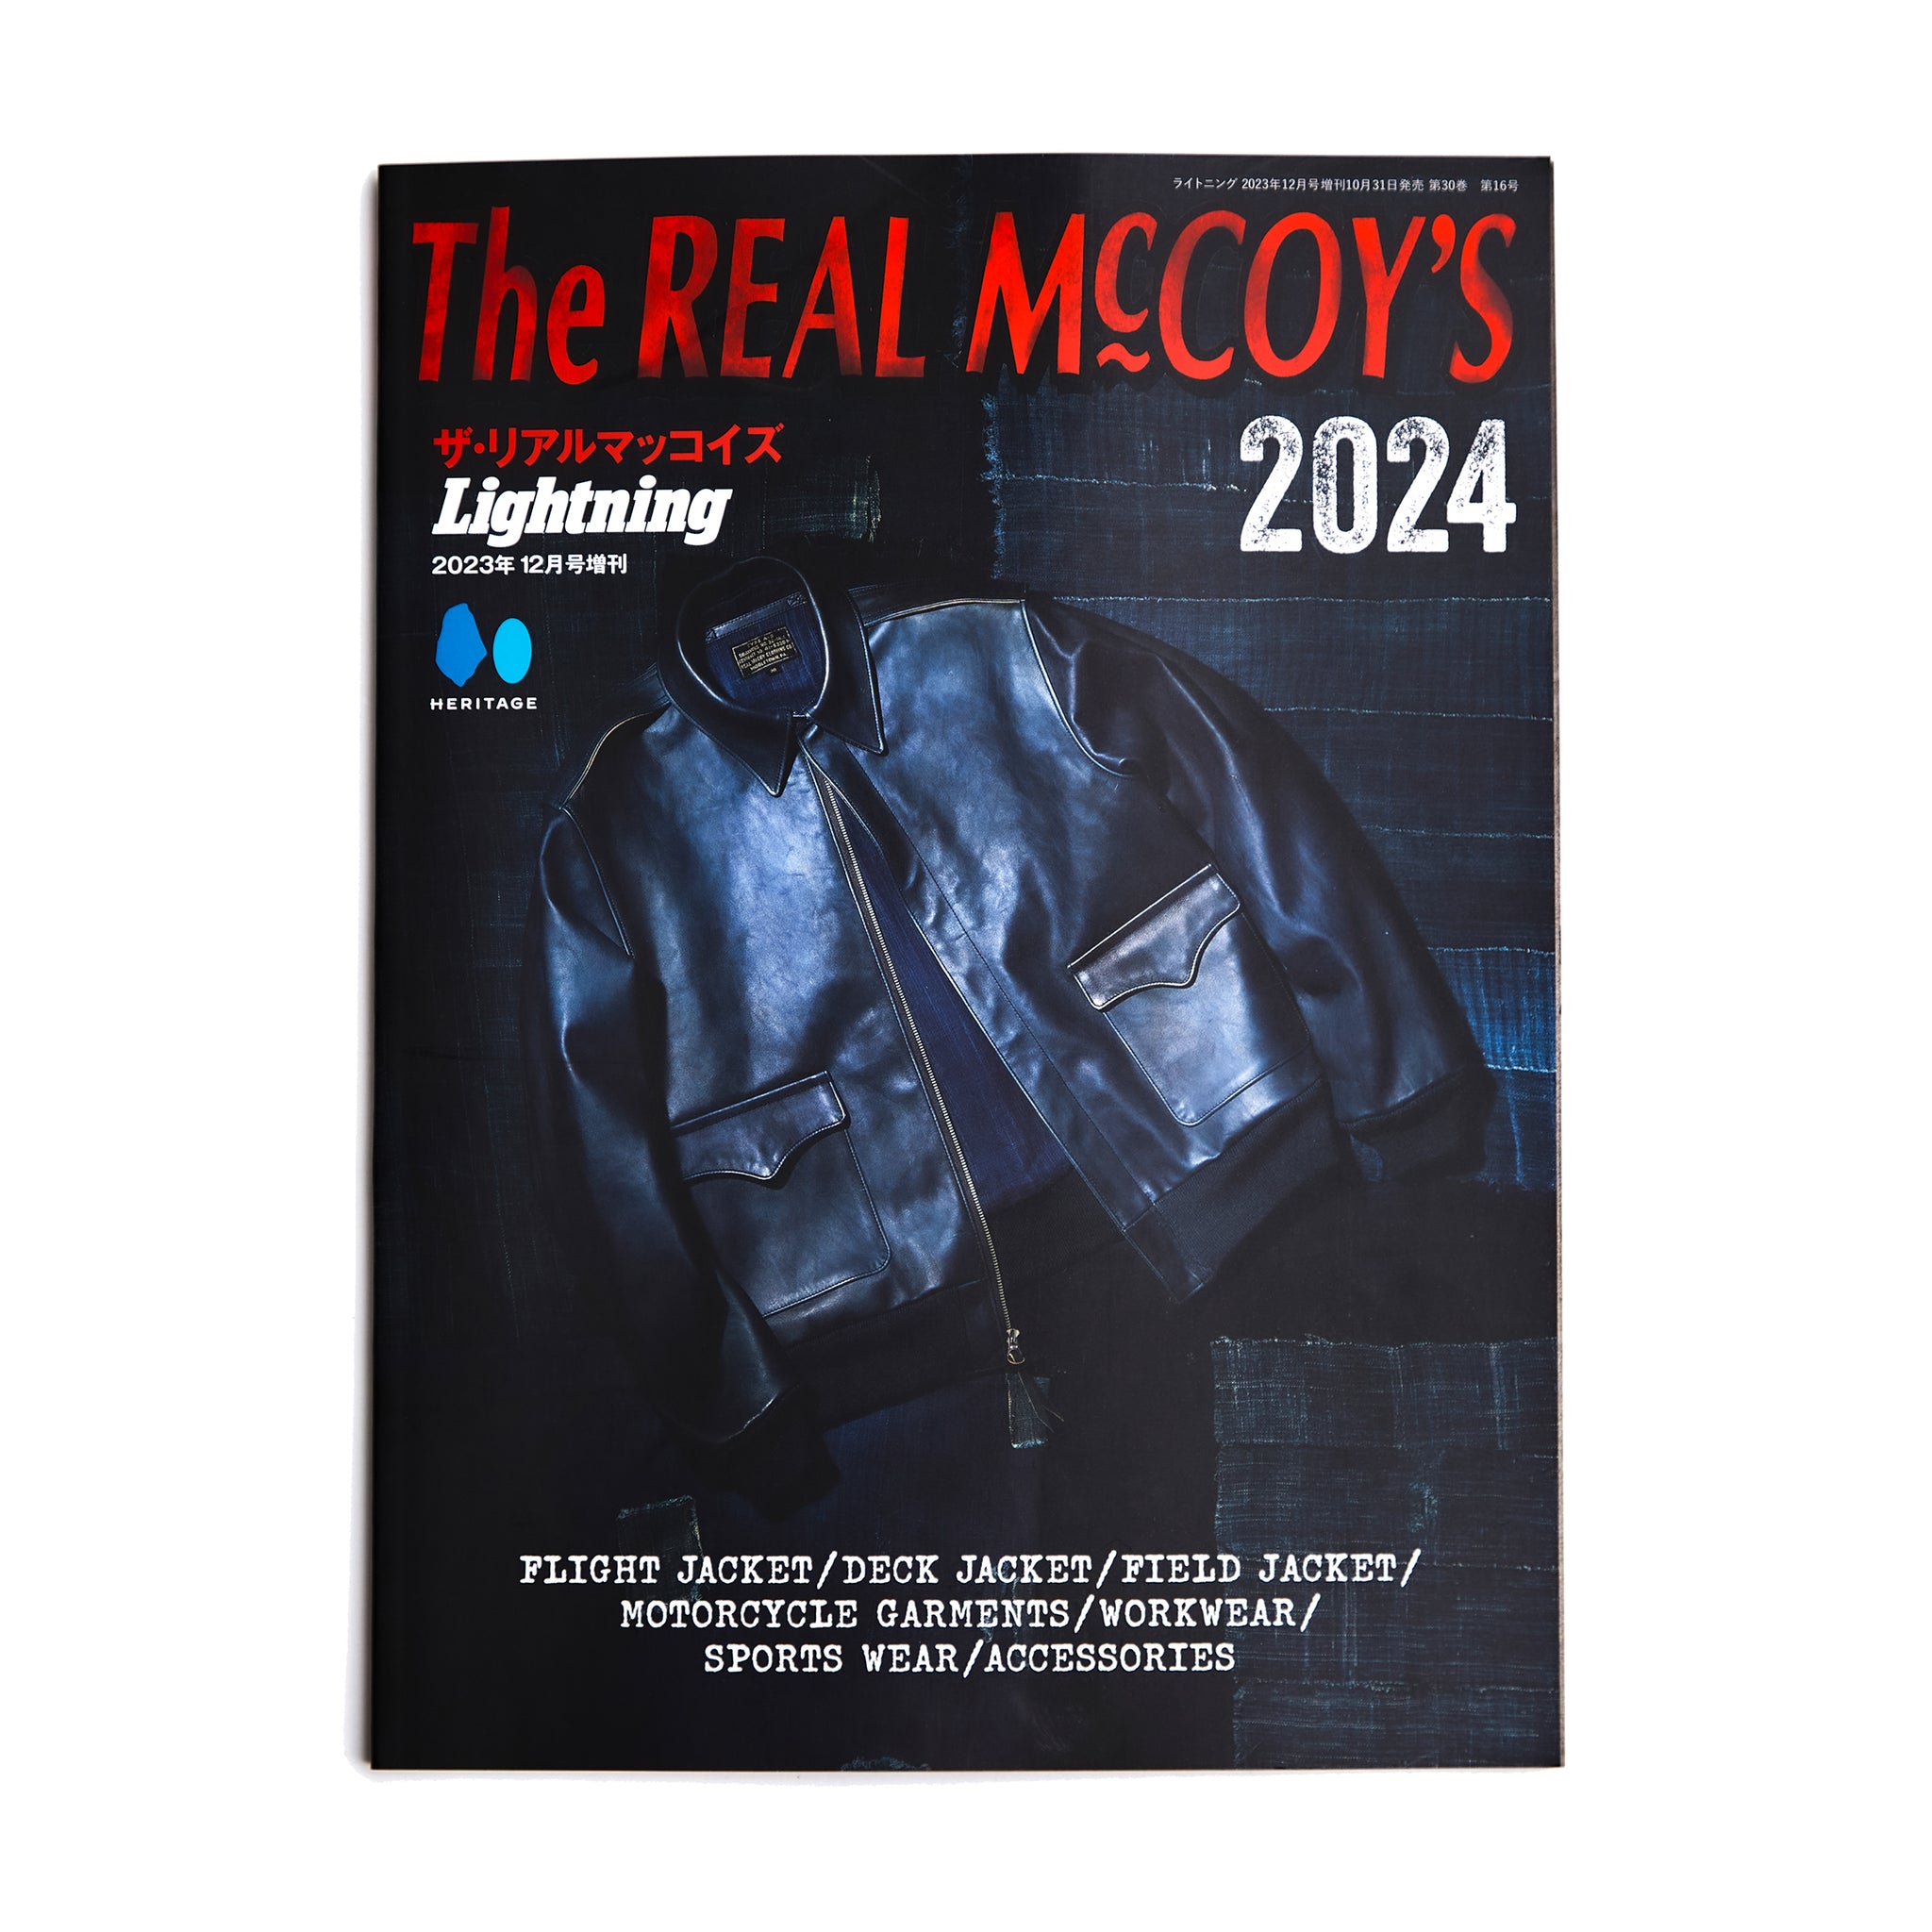 THE REAL McCOY'S BOOK 2024